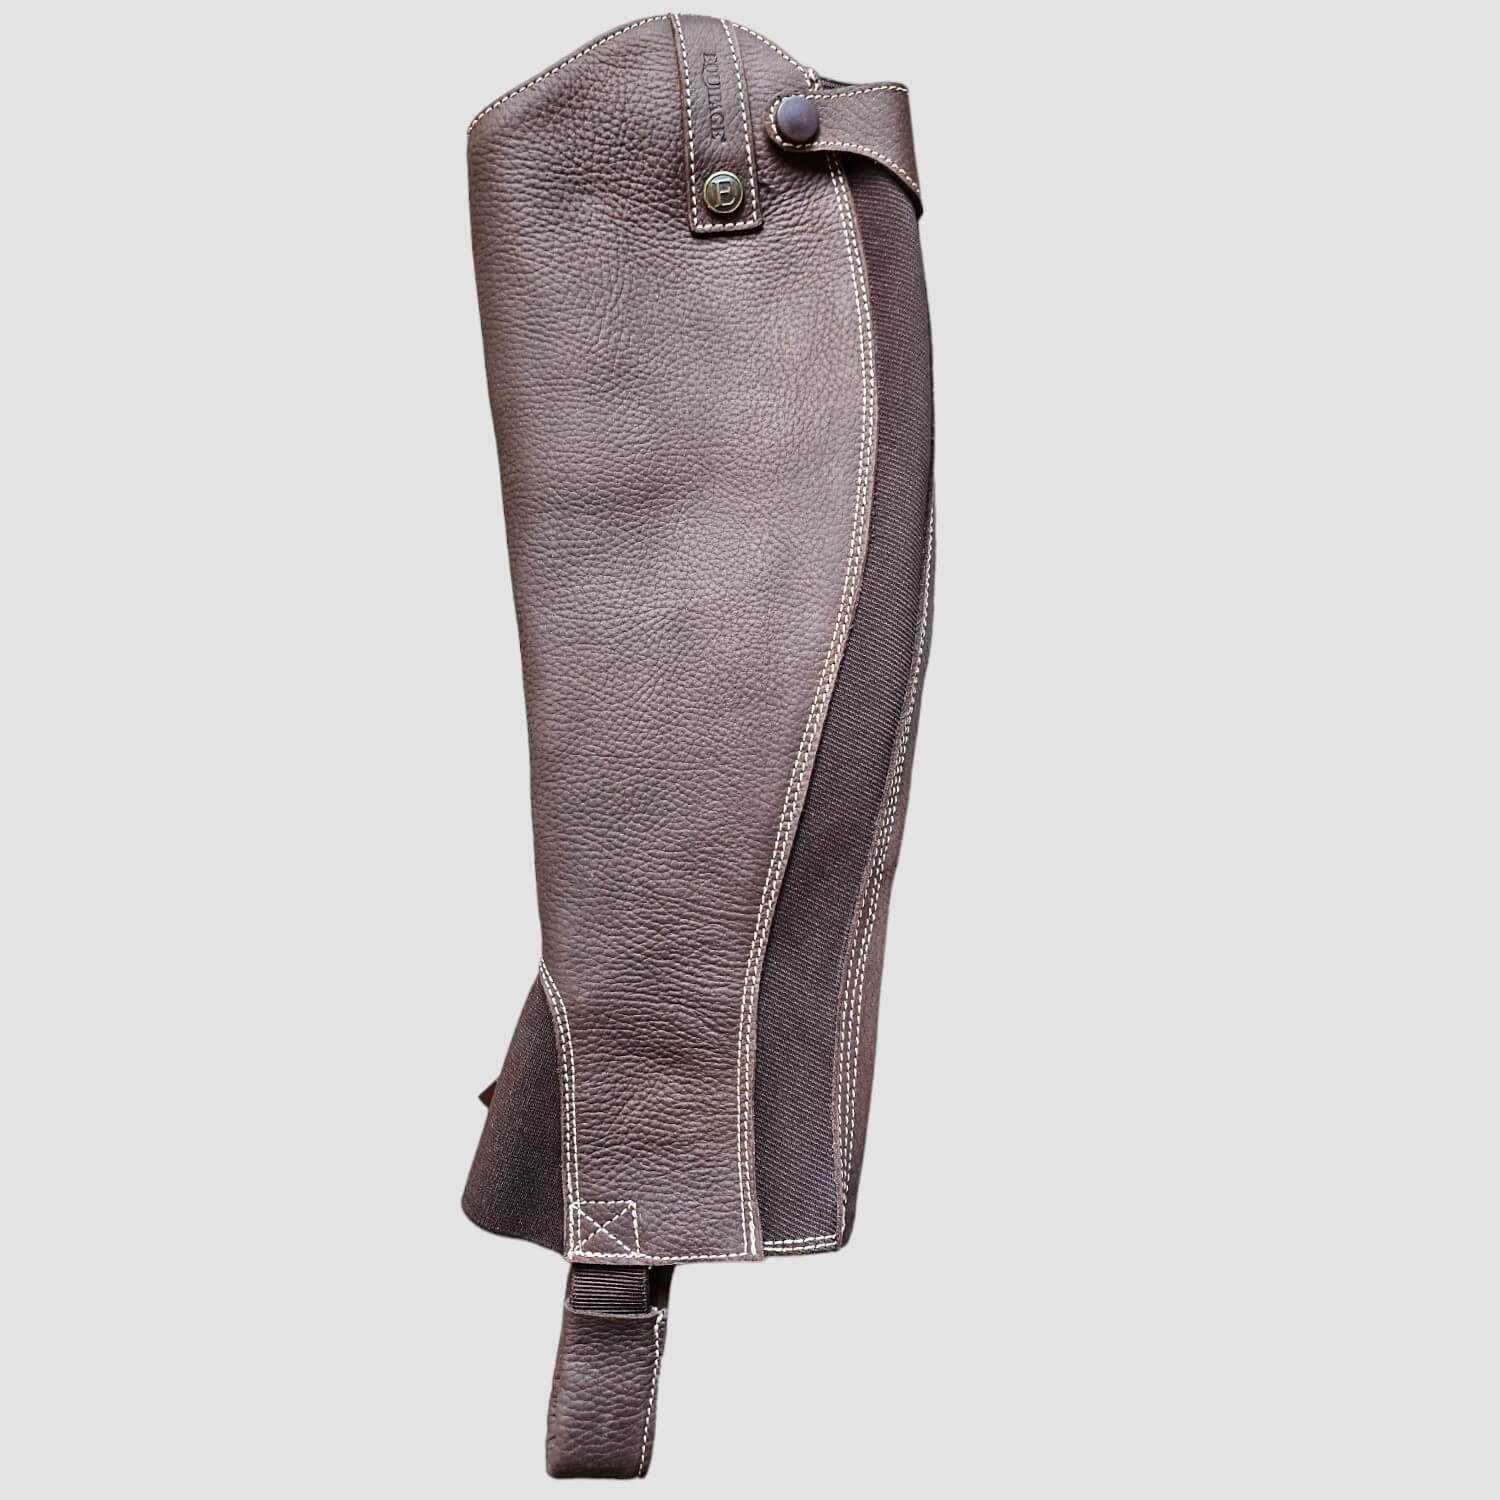 Three Horses Equipage Siena Chaps Brown